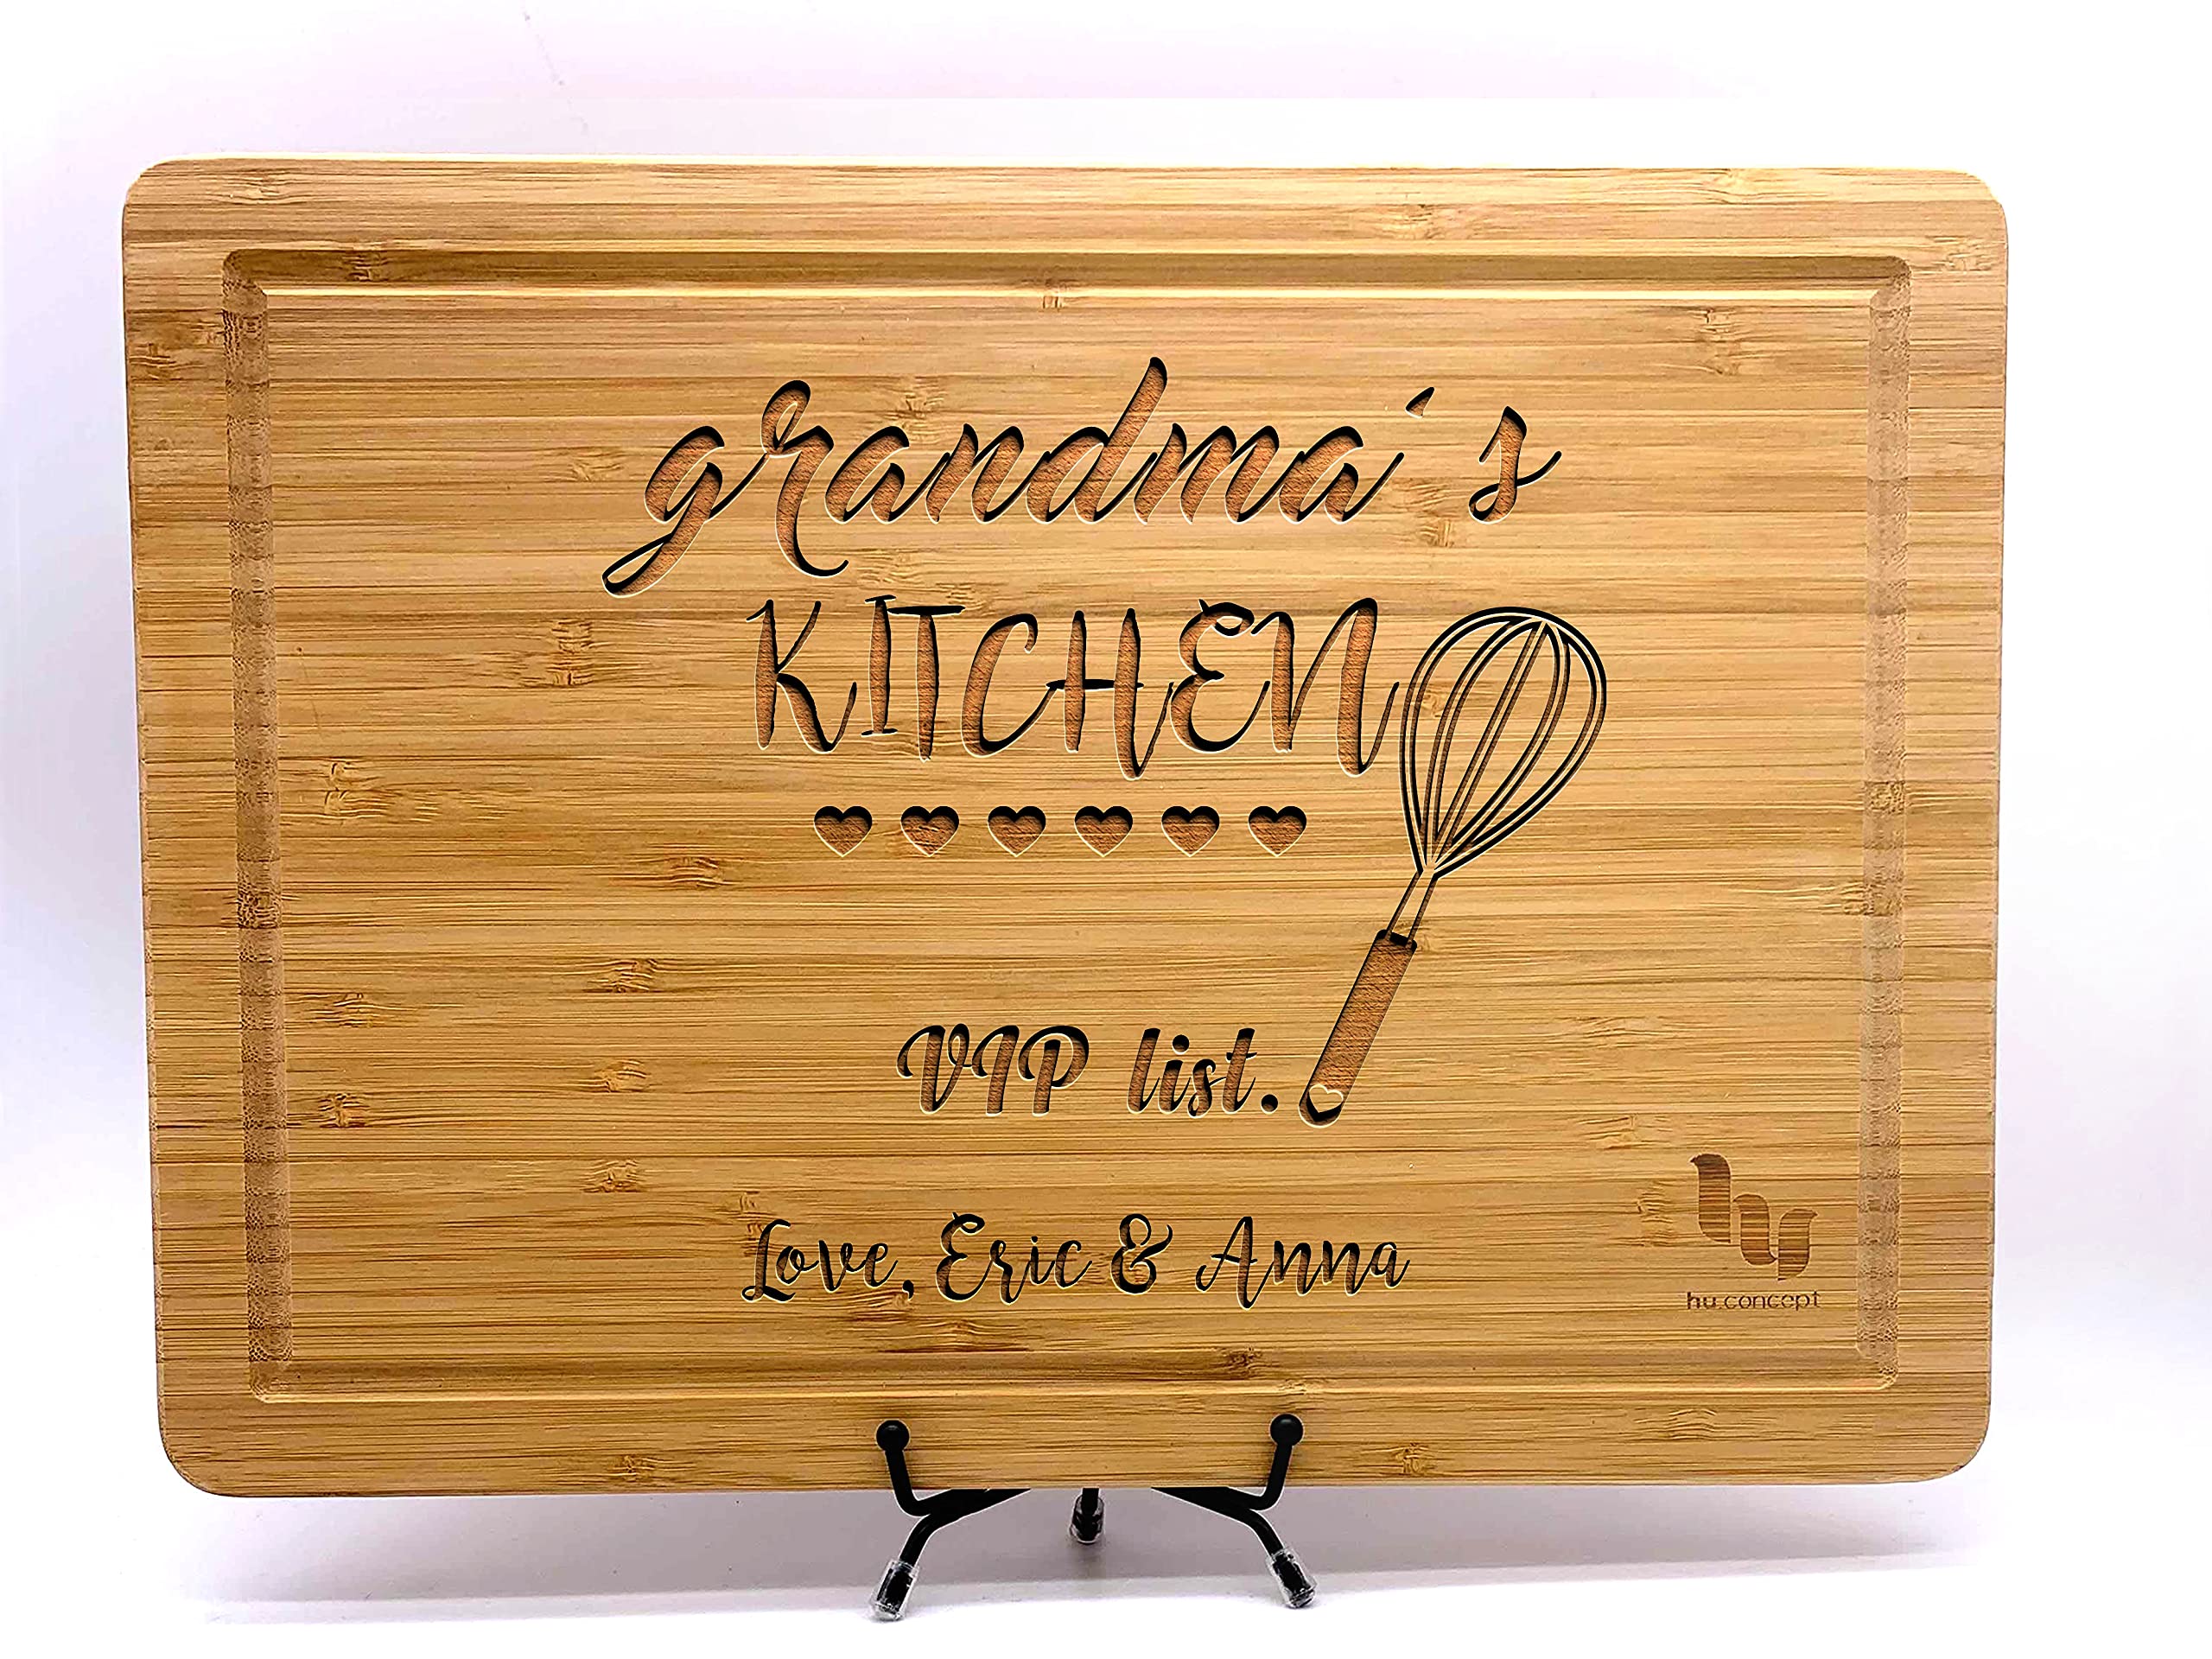 Personalized Gifts for Mom Kitchen, Cutting Board, Custom Engraved Serving Platter, Customized Mom and Grandma Gift, Decor for Mother's Kitchen, Engraved Kitchen Sign, Different Design Options